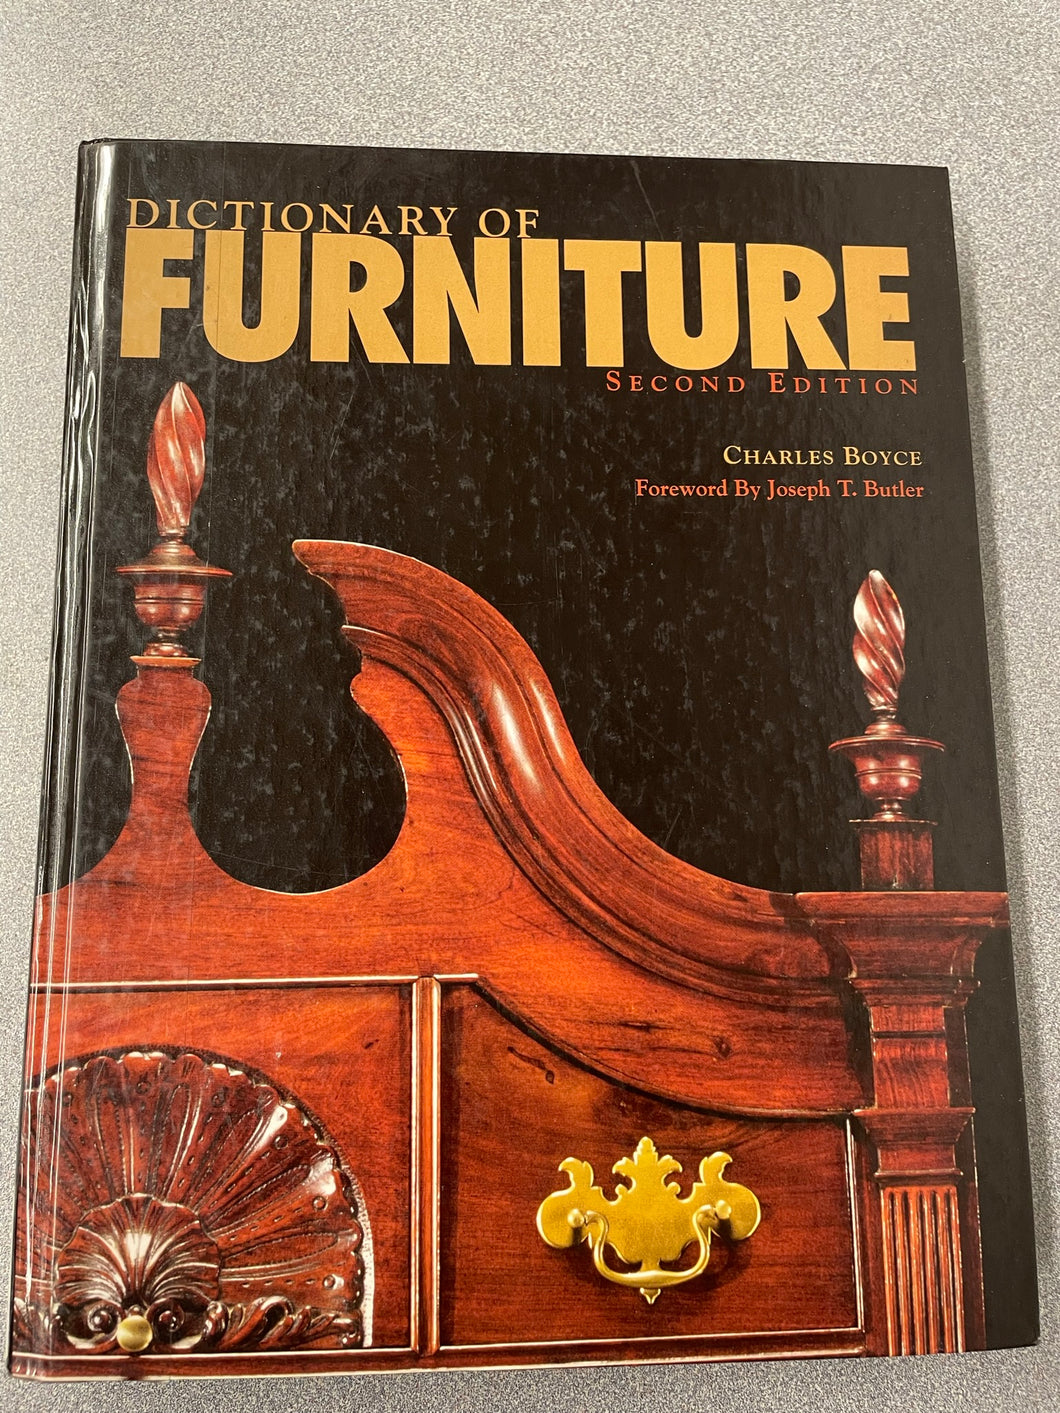 Dictionary of Furniture, Second Edition, Boyce, Charles, ed., [2001] VA 9/23